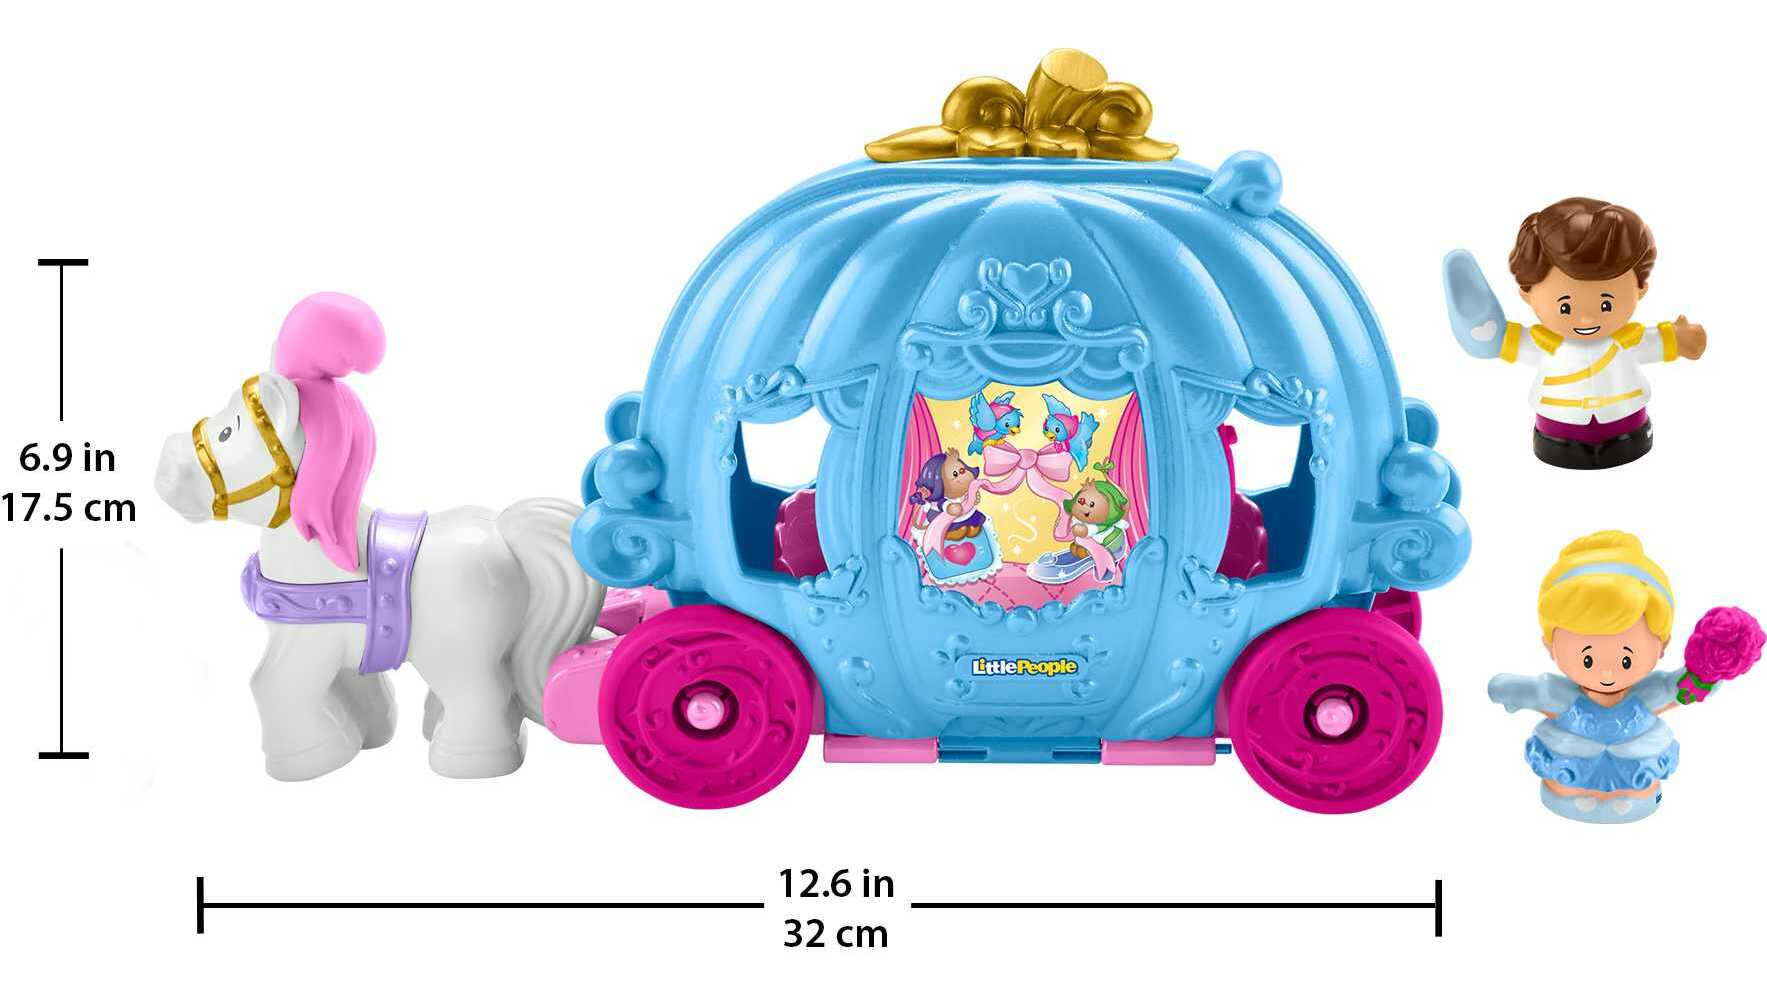 Disney Princess Cinderella’s Dancing Carriage Little People Toddler Playset with Horse & Figures - image 5 of 6